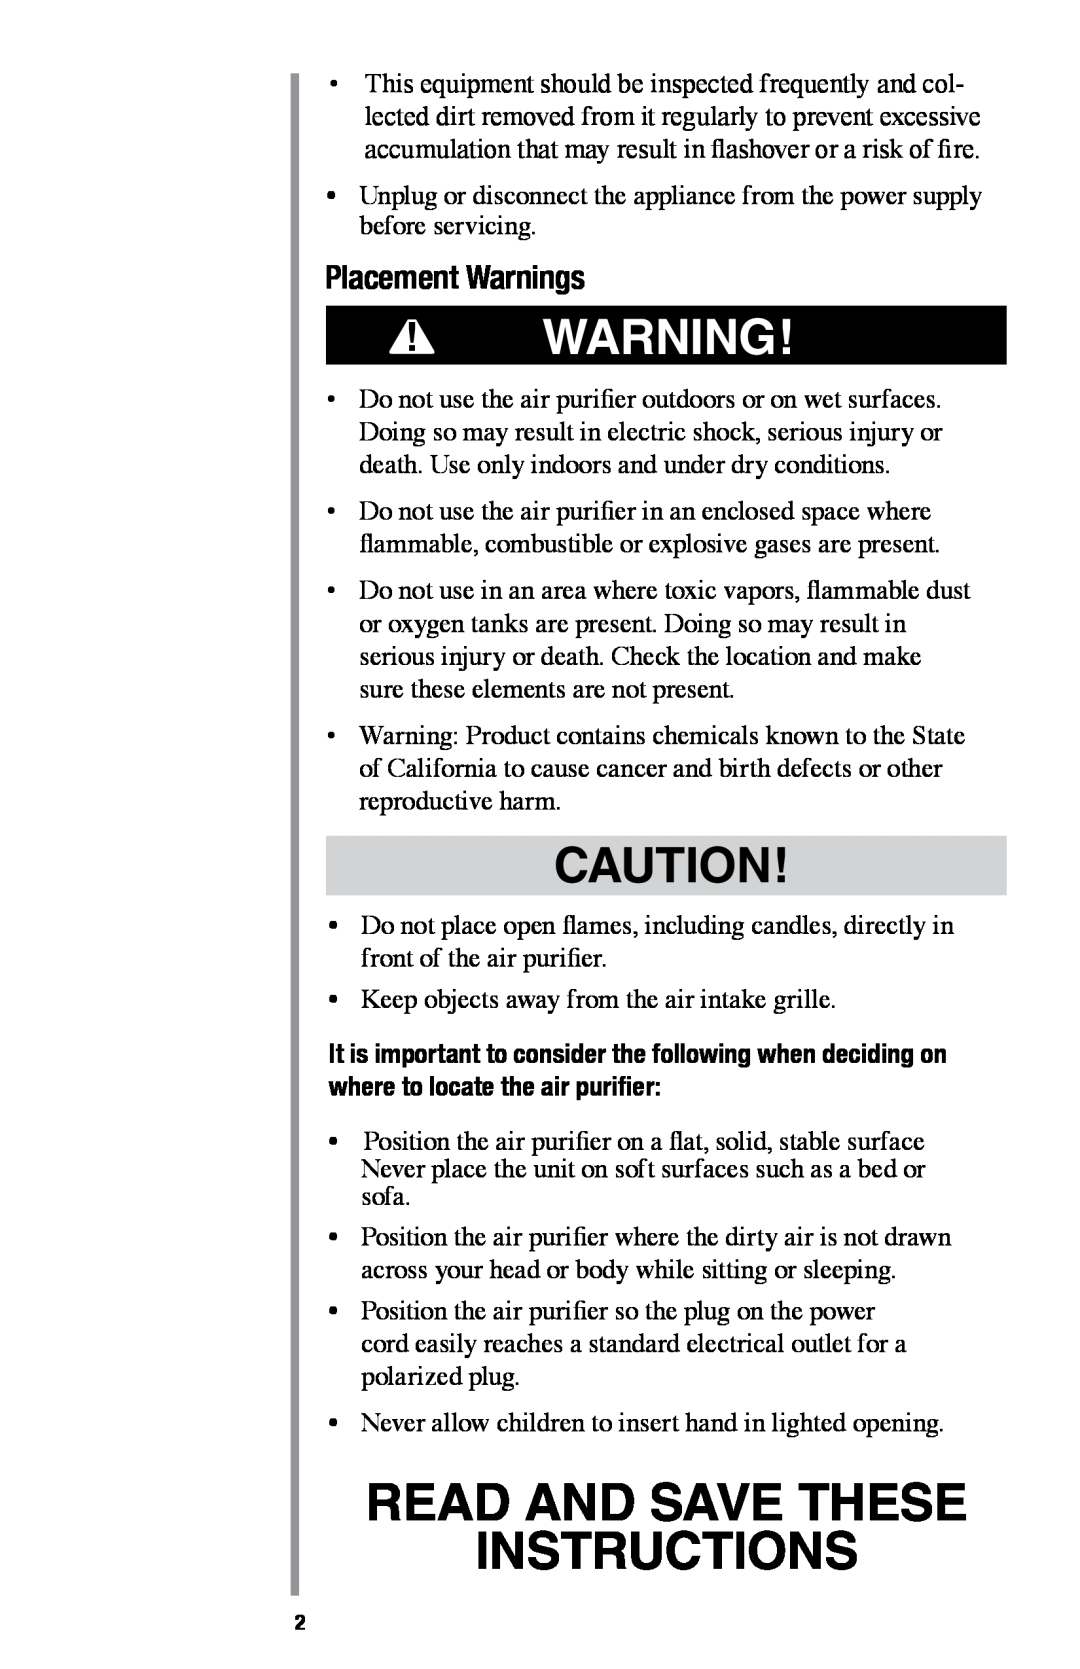 Oreck AIR94 manual Placement Warnings, Read And Save These Instructions 